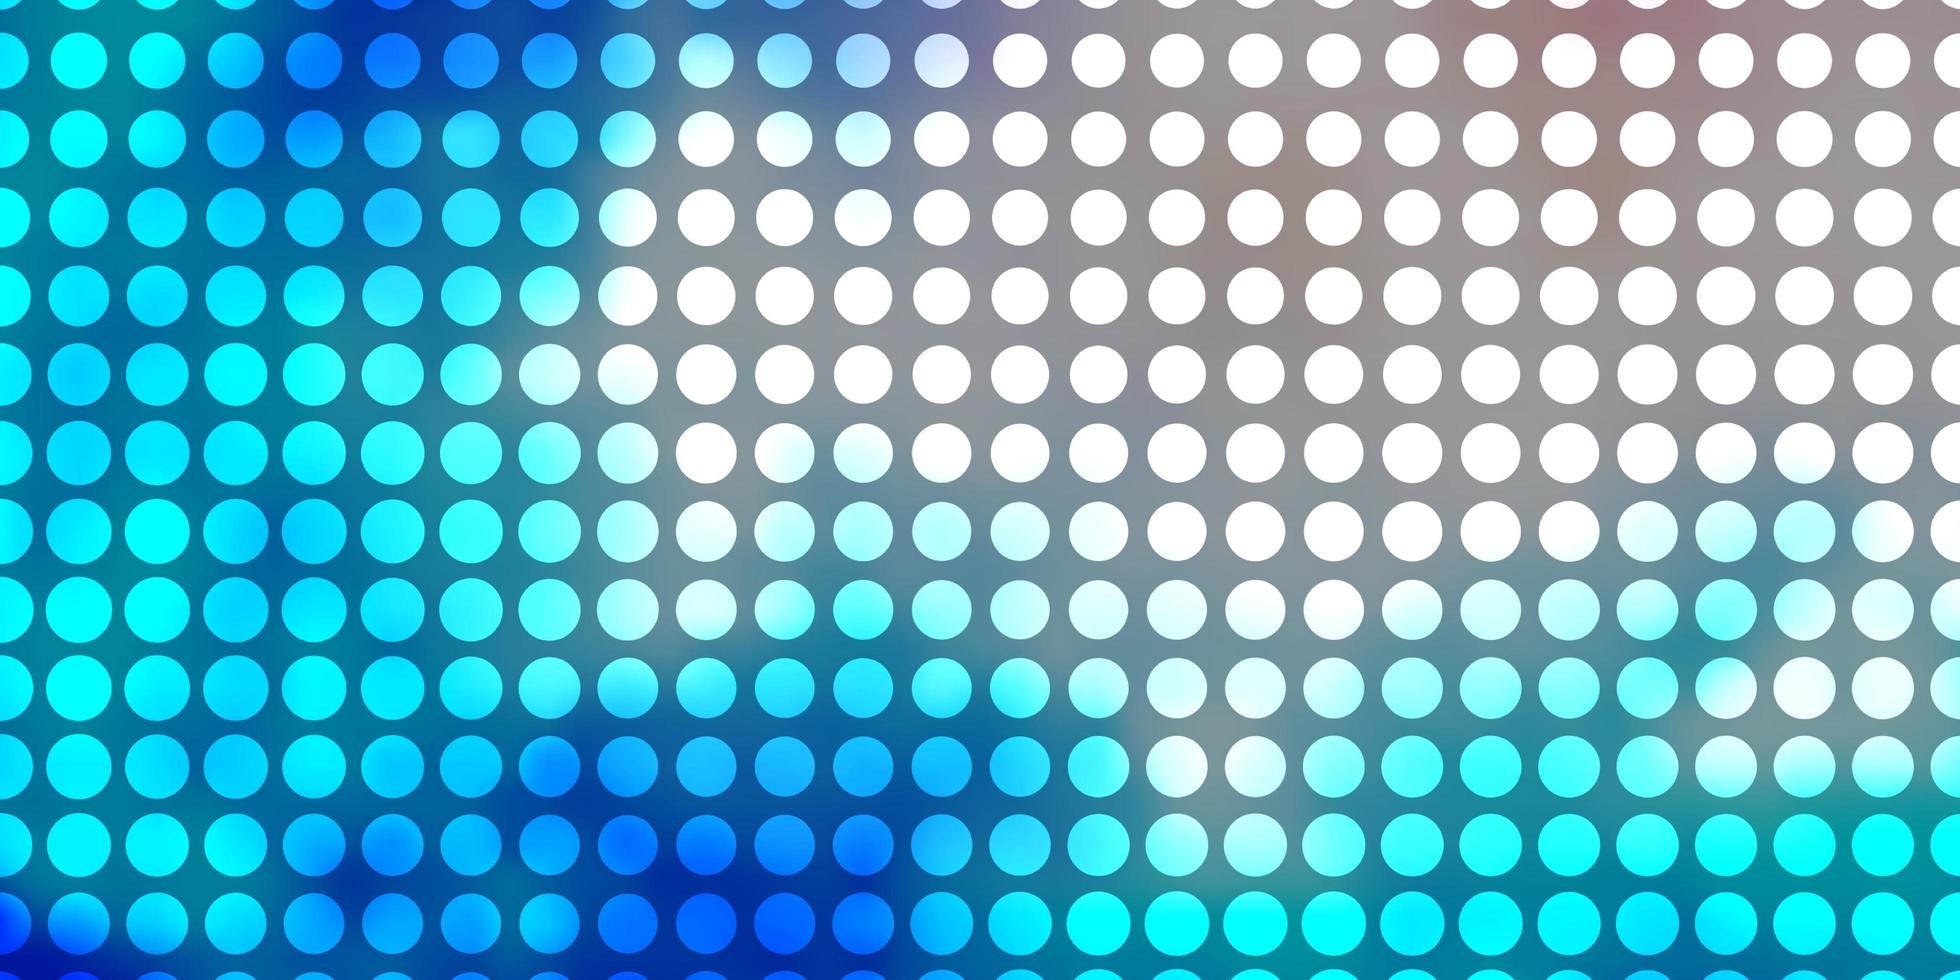 Light Pink, Blue vector backdrop with circles.